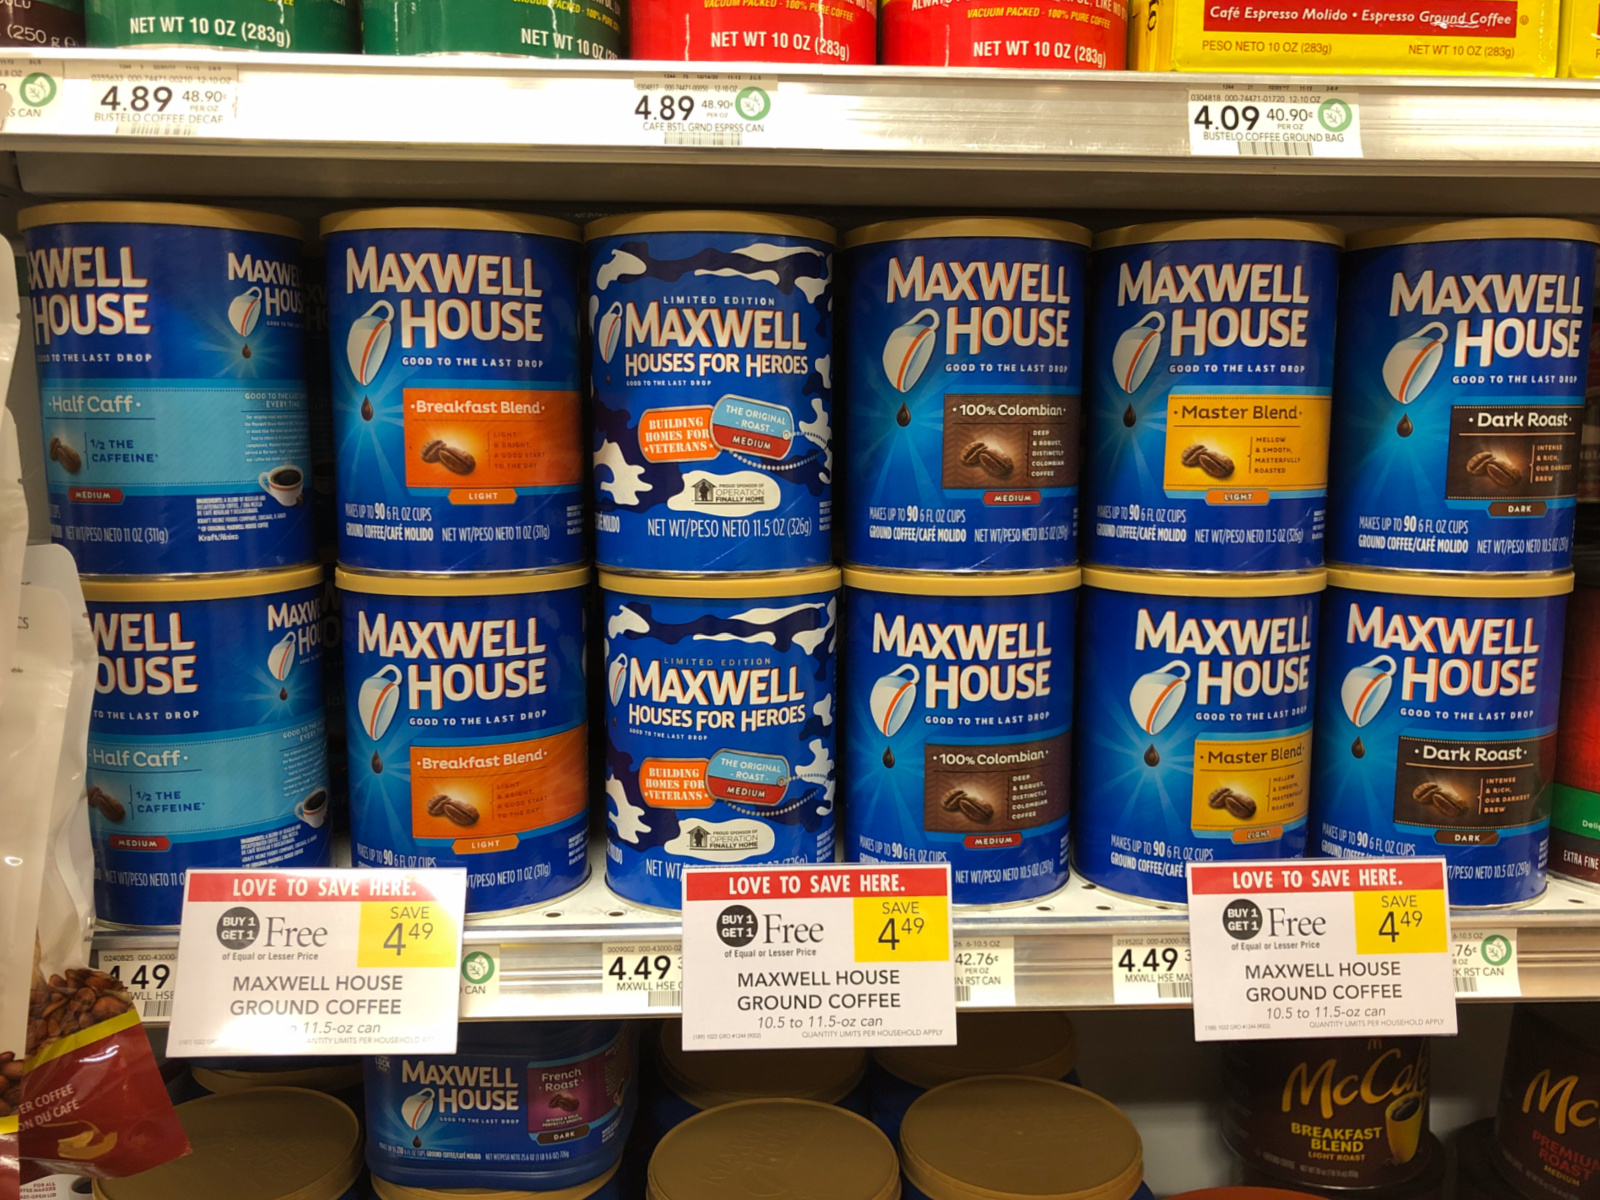 Can't-Miss Deal On Maxwell House Coffee - Buy One, Get One FREE At Publix! on I Heart Publix